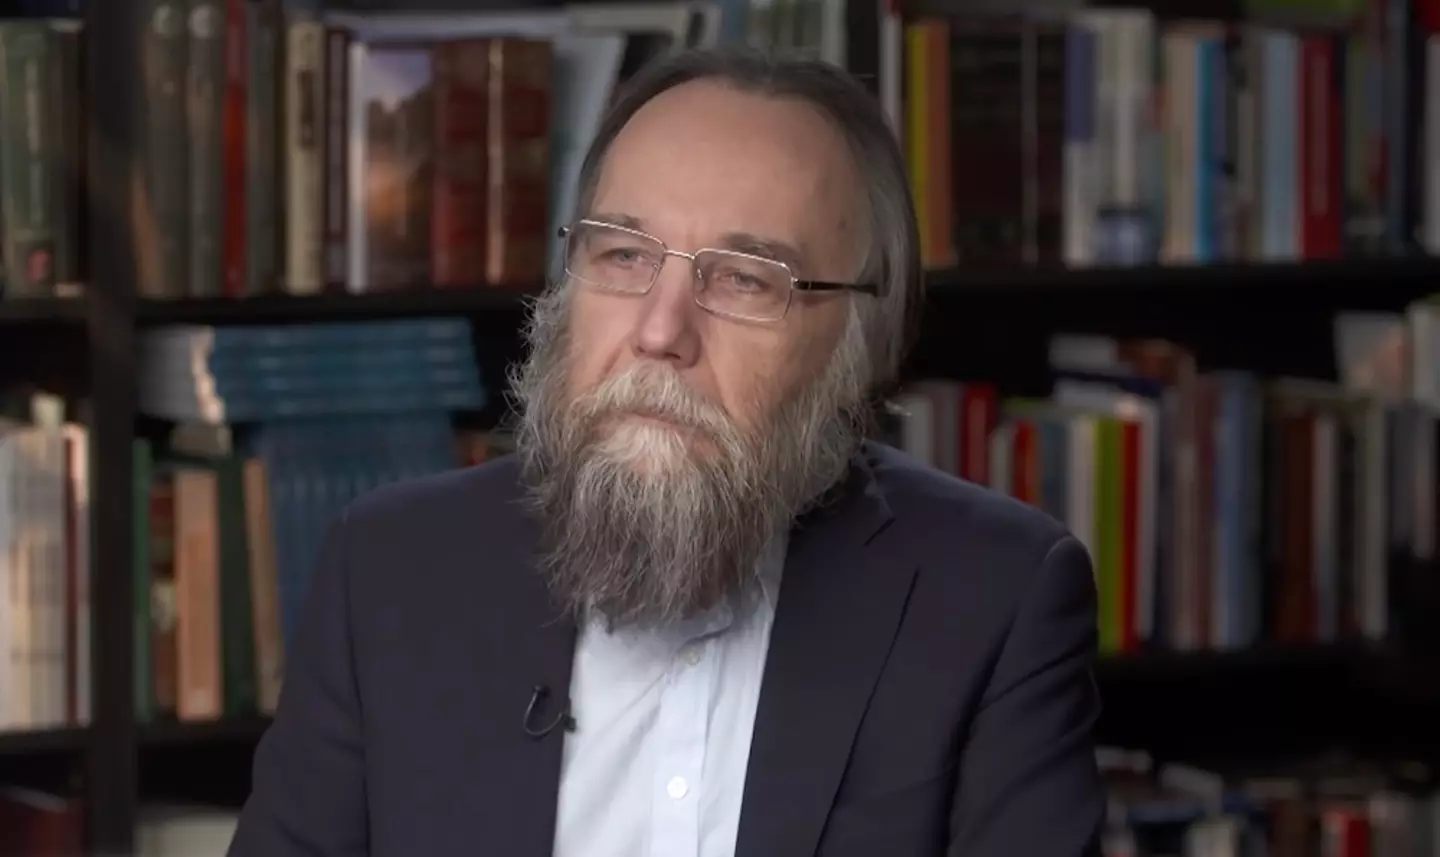 Her father Alexander Dugin's views are often characterised as fascist.